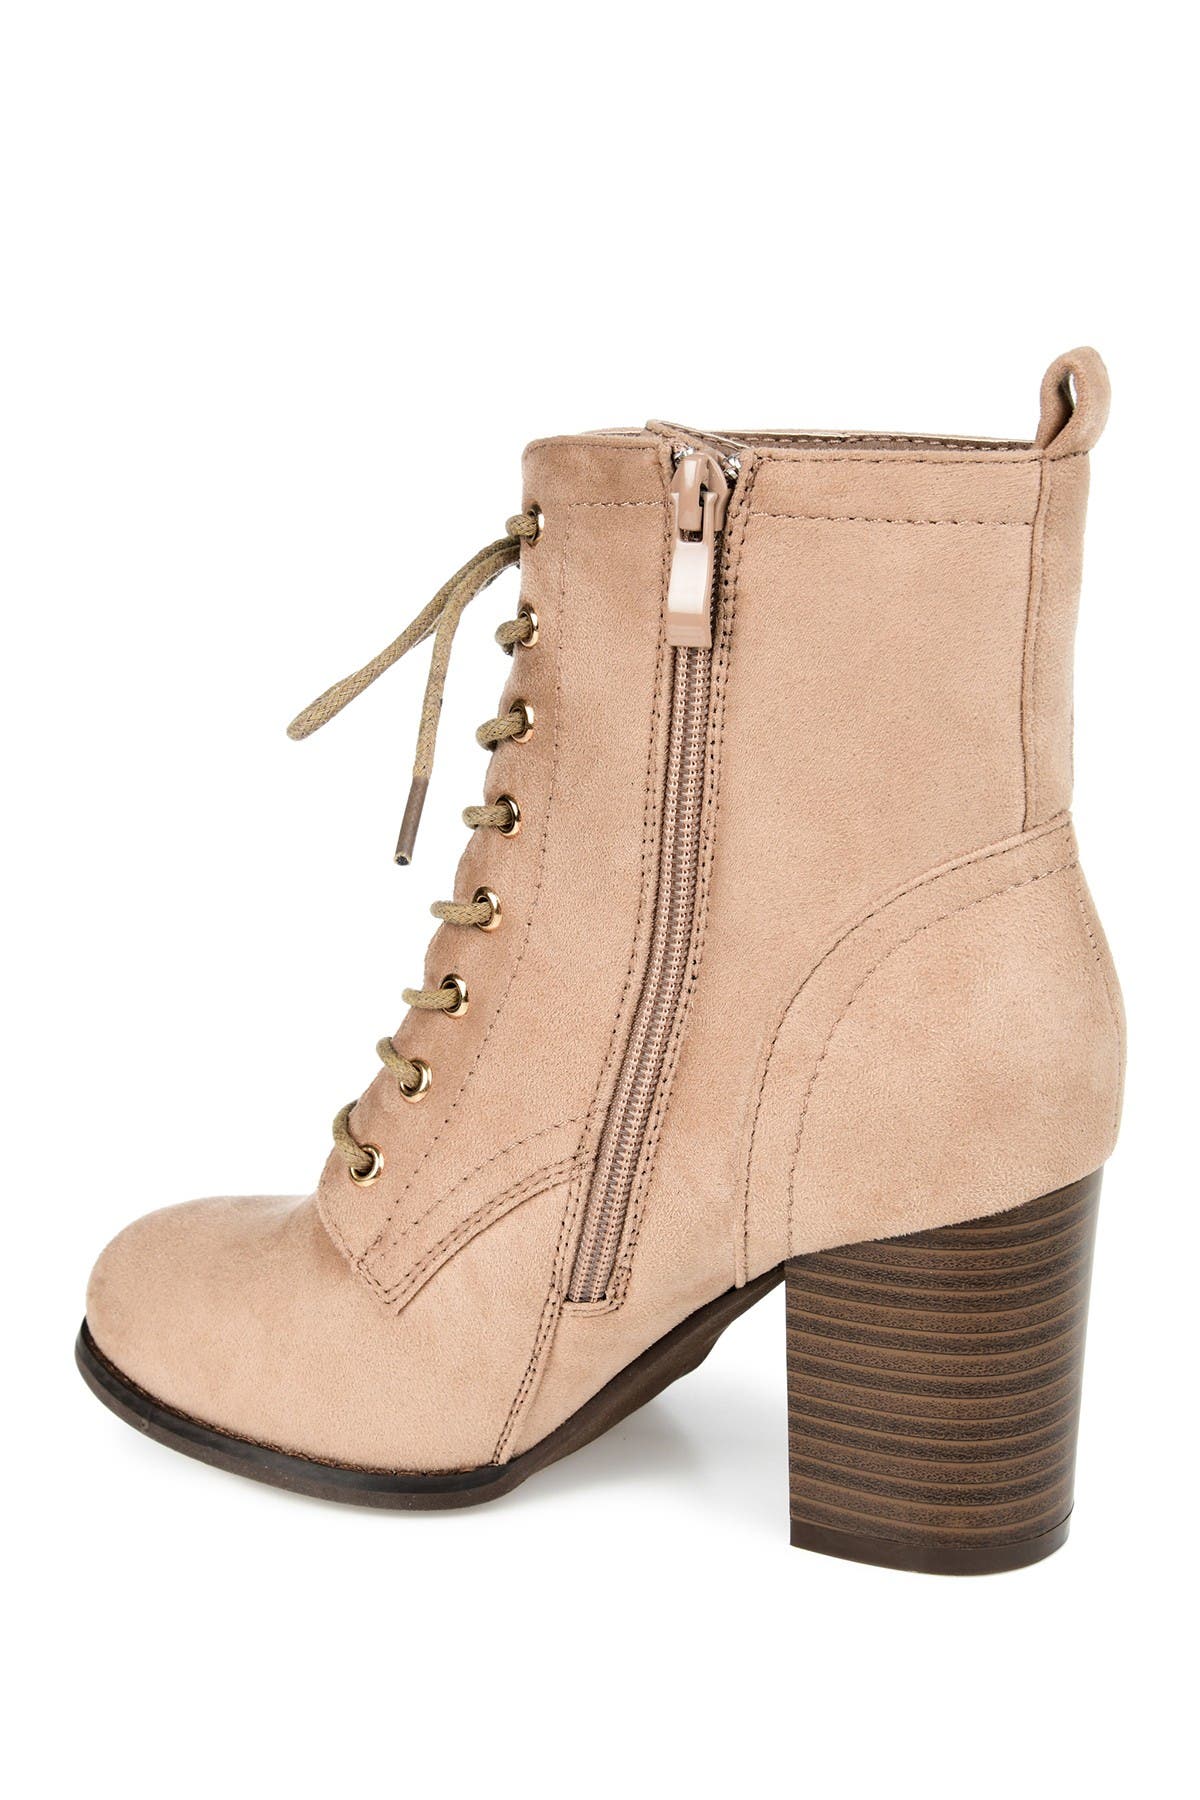 Journee Collection Baylor Lace-up Boot In Medium Beige